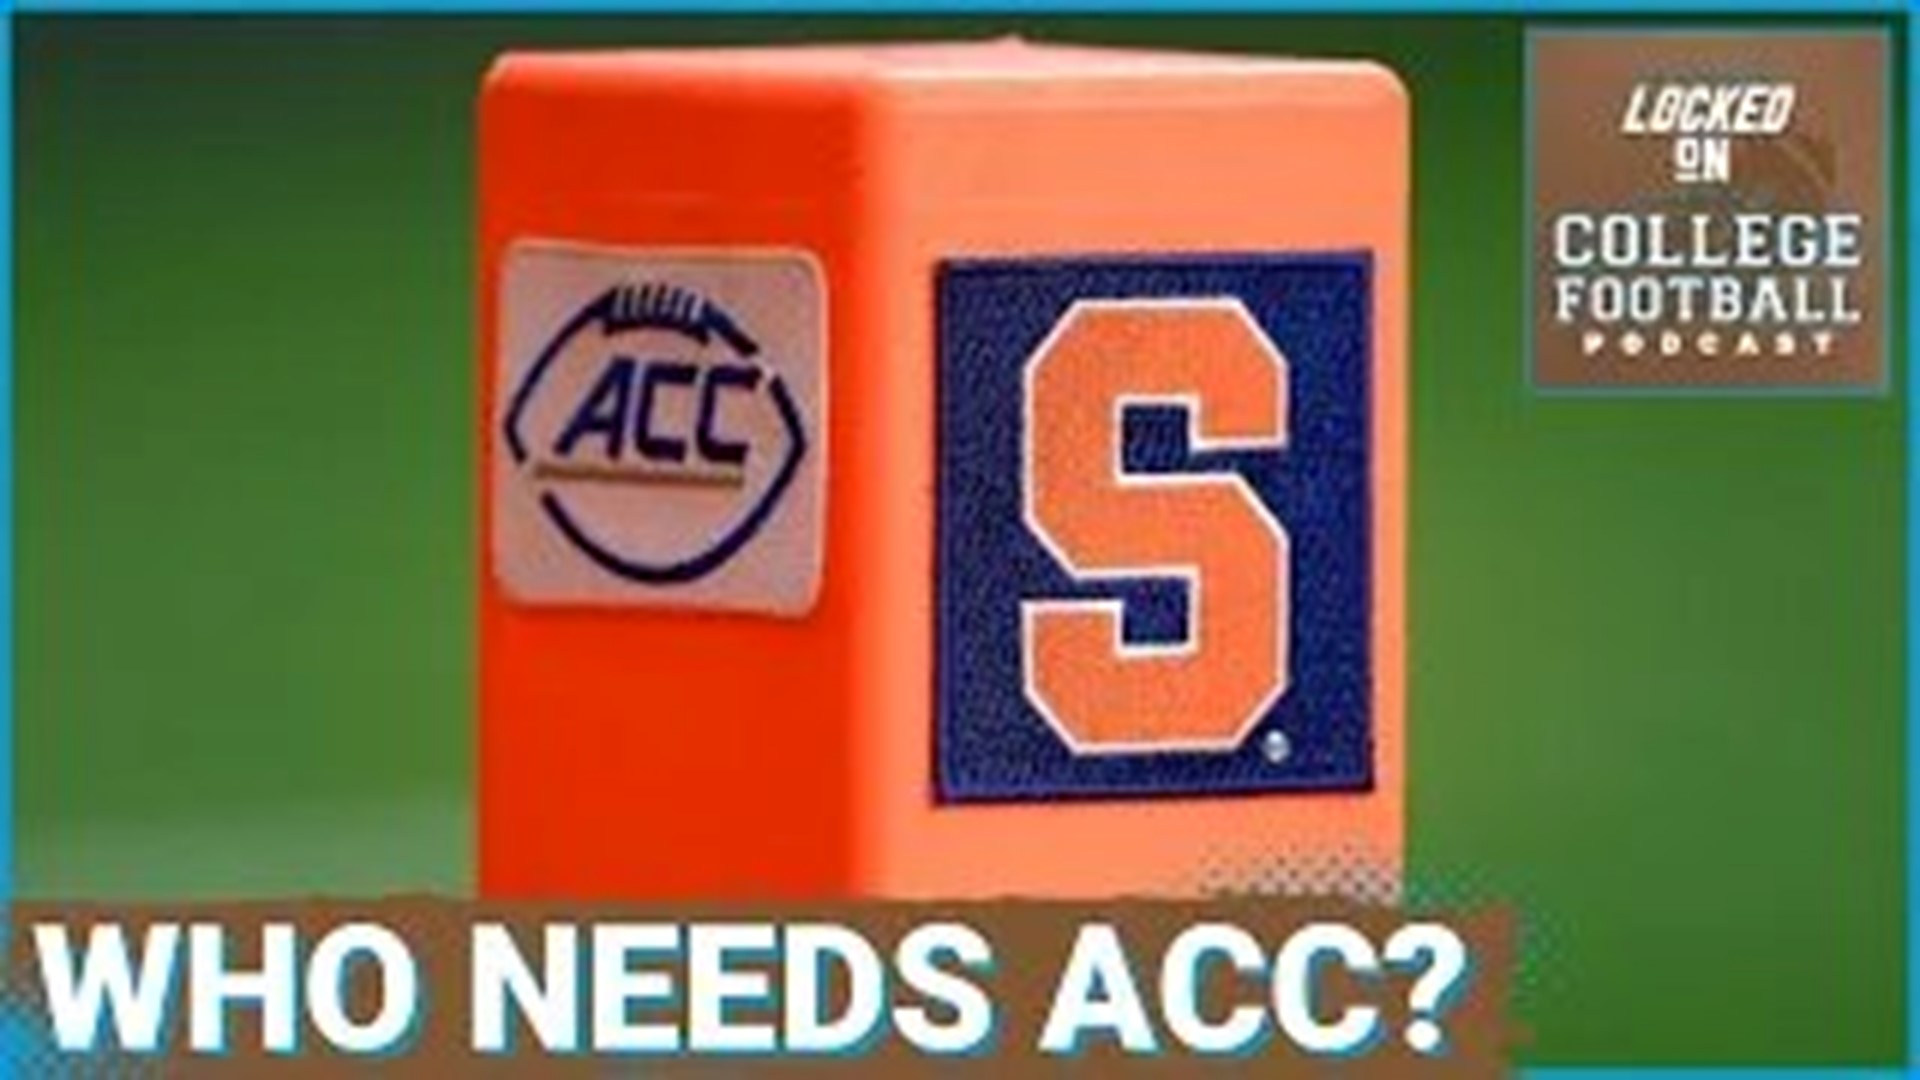 The ACC could struggle to survive if Florida State and Clemson are successful in their attempts to leave the league. Who most needs the league to stick around?